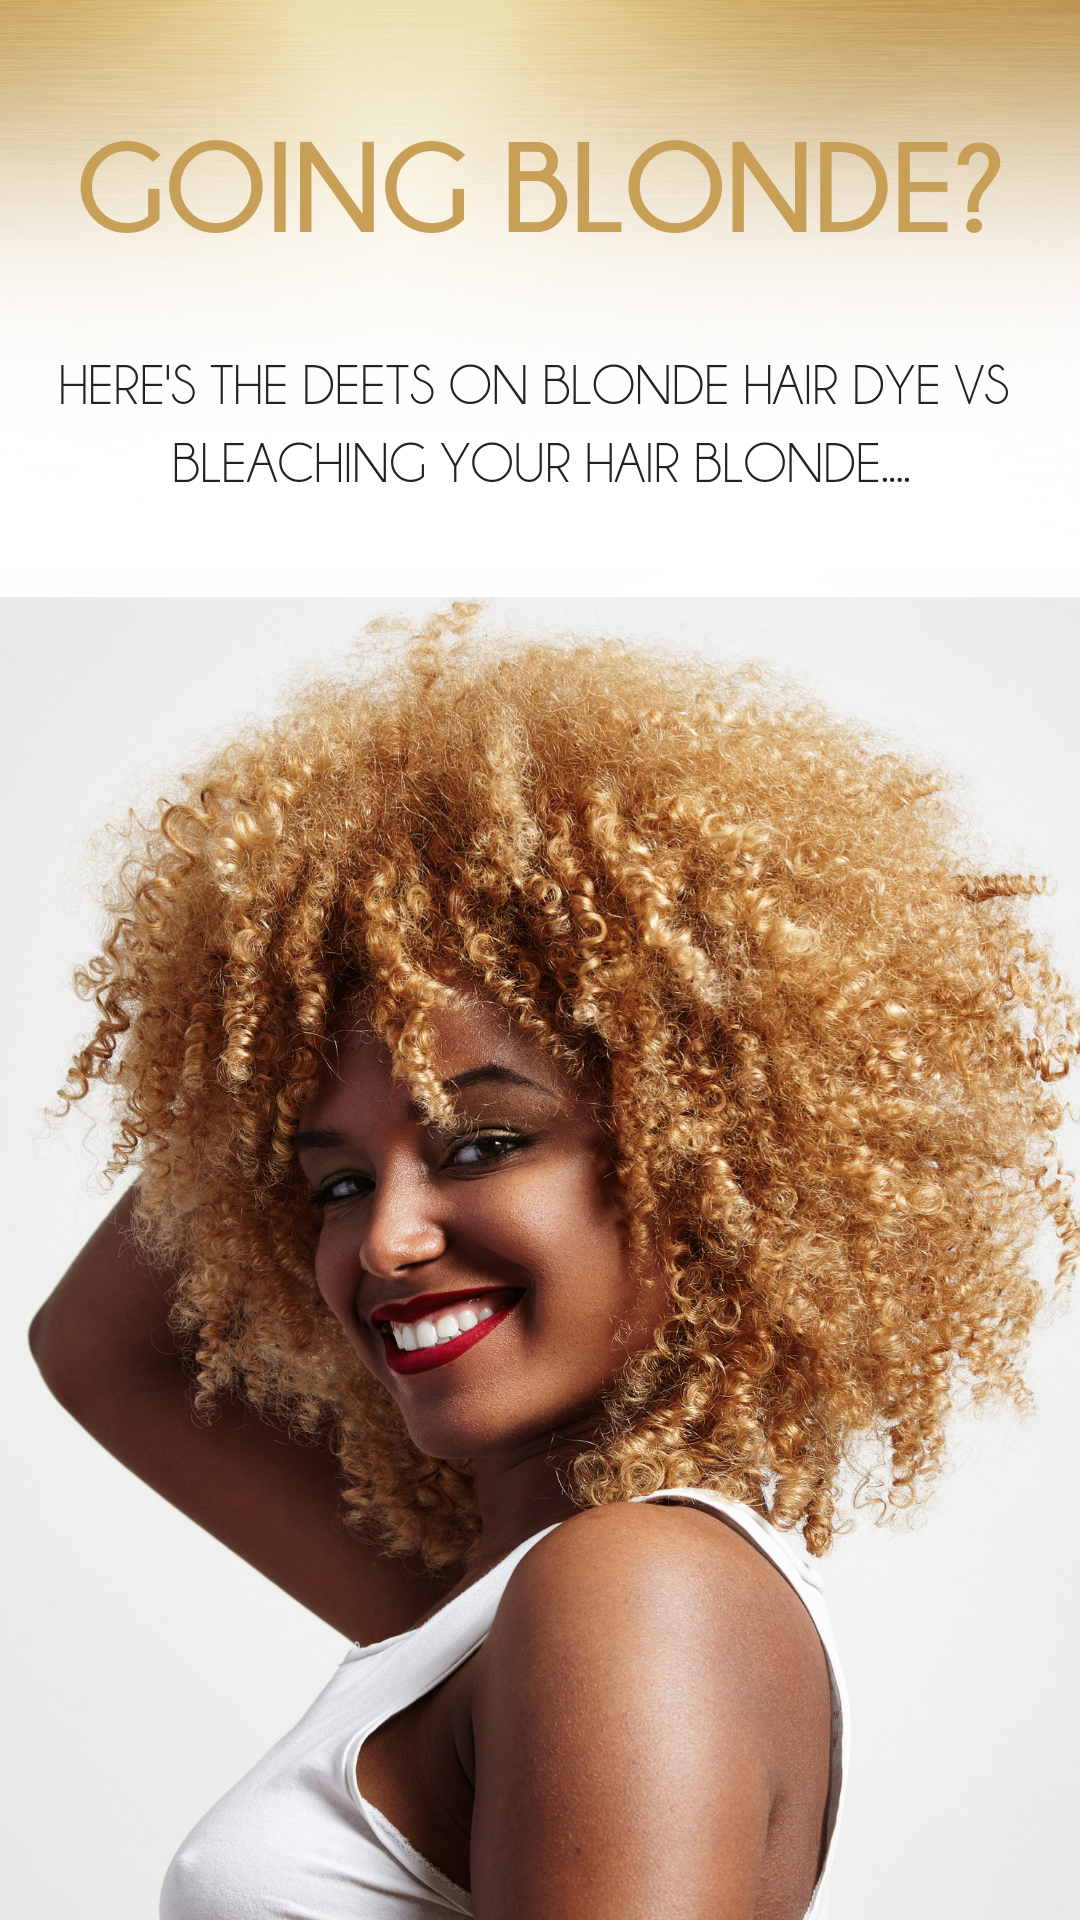 Blondes Have More Fun: The Truth About Dye vs Bleach